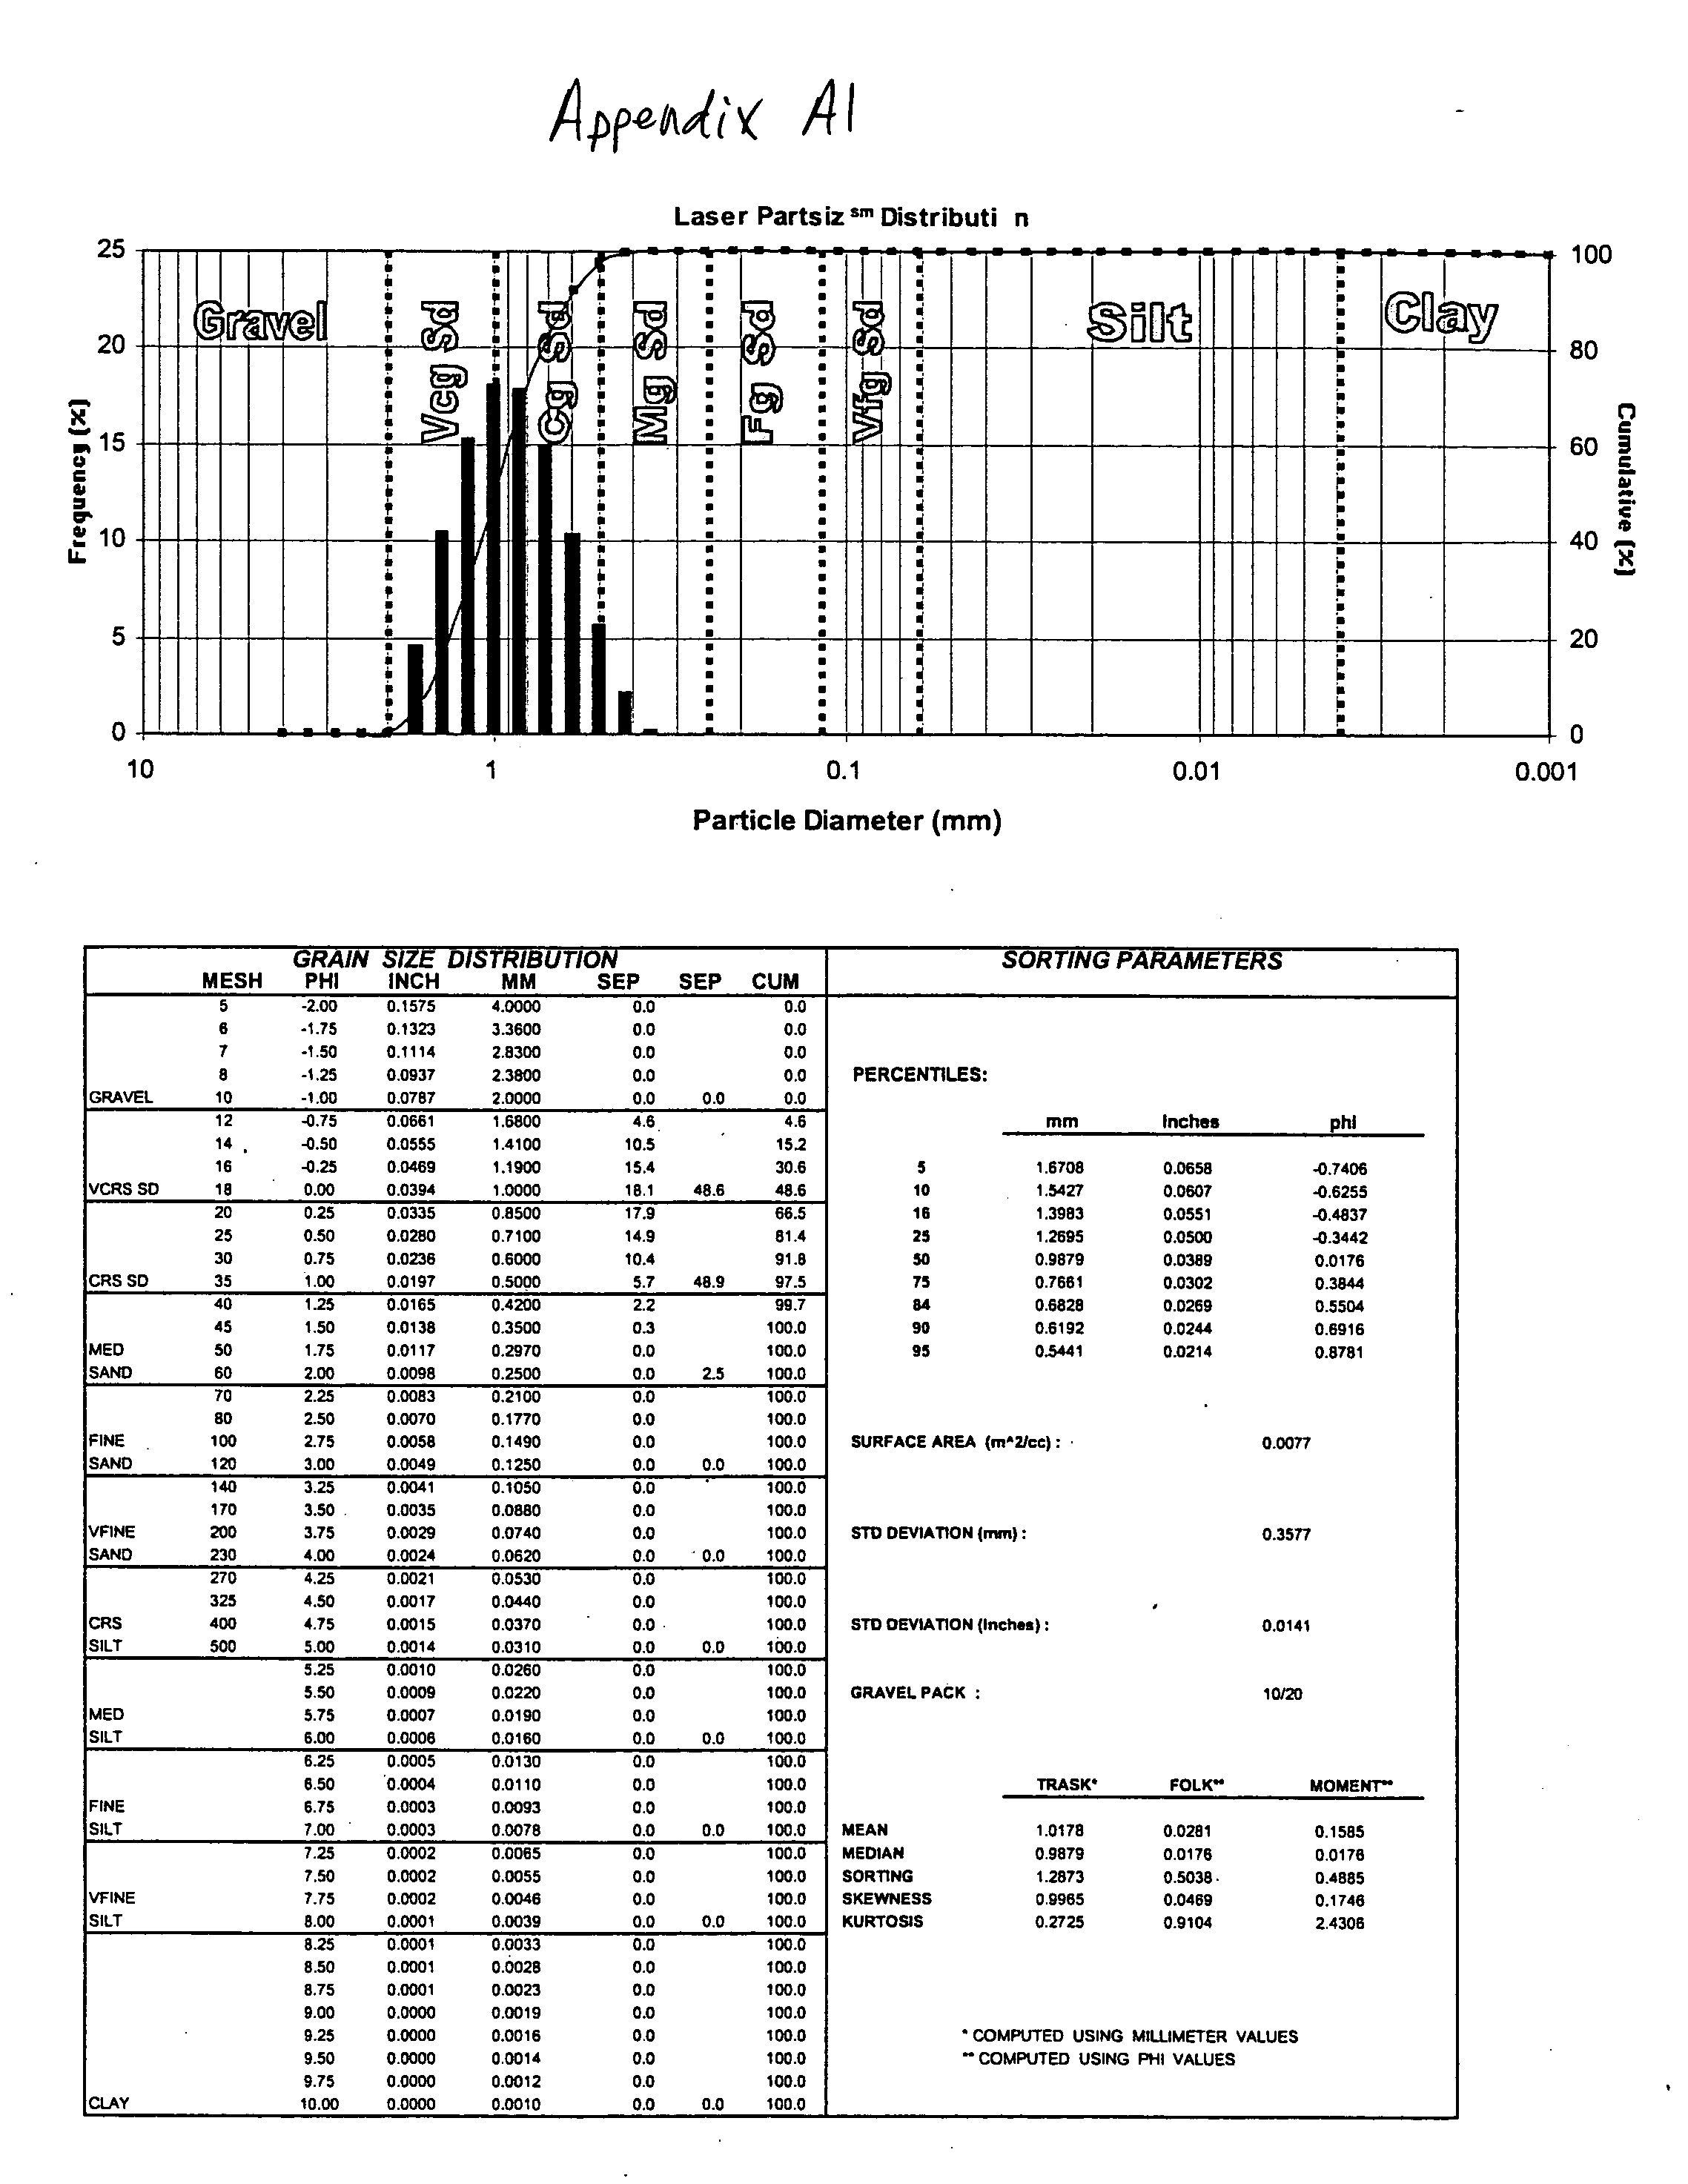 Method for preparing and processing a sample for intensive analysis